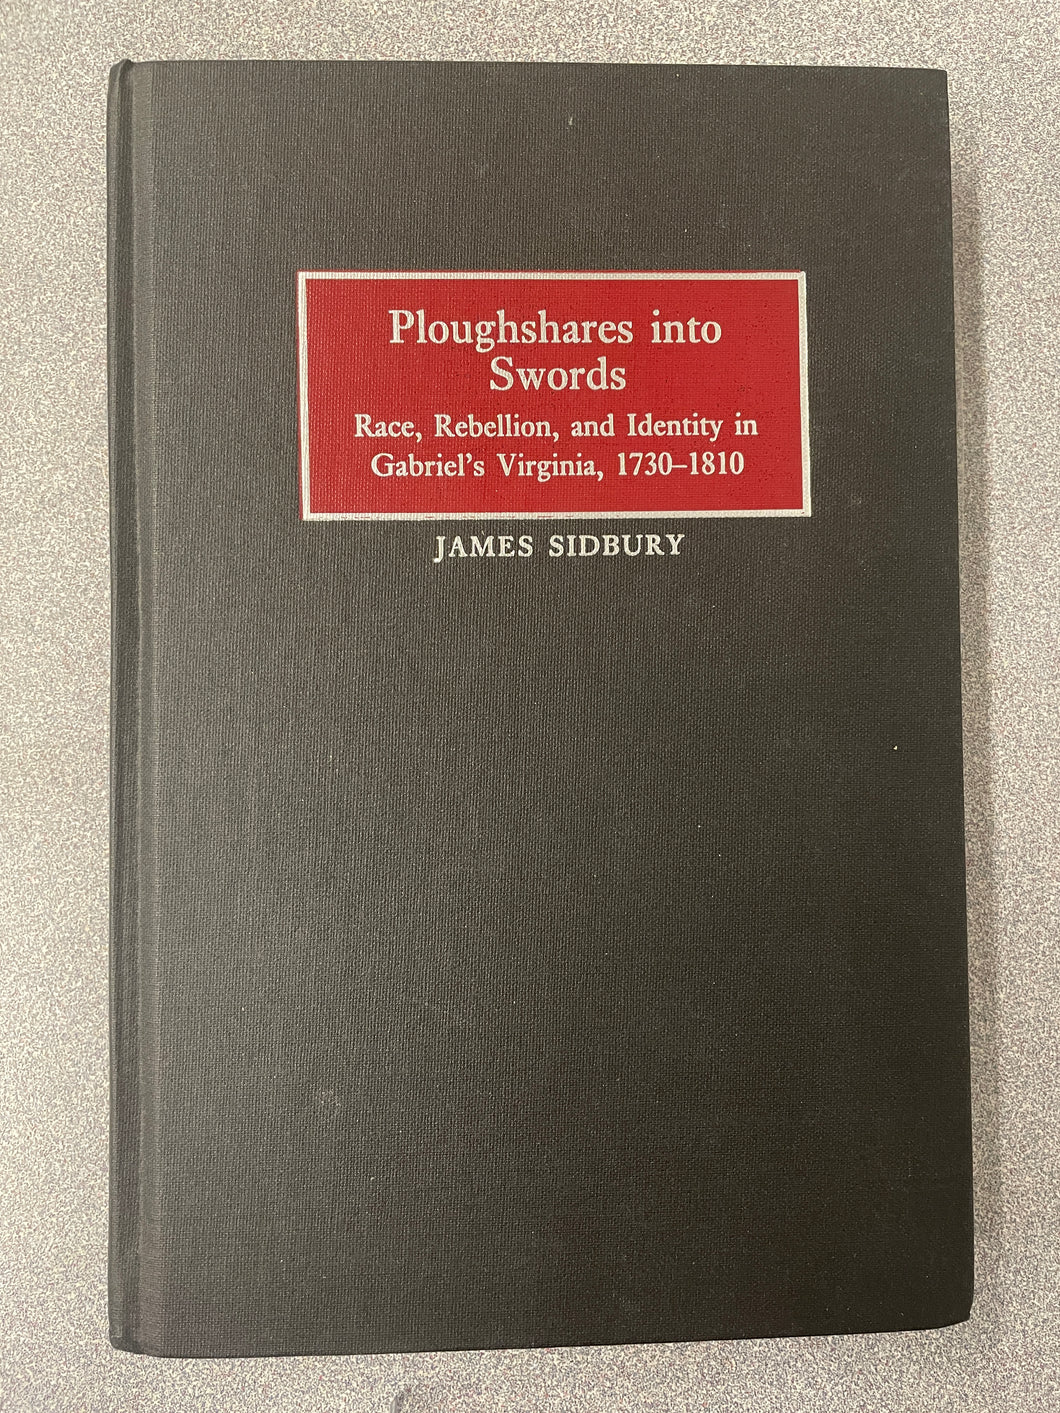 BH  Ploughshares Into Swords: Race, Rebellion, and Identity in Gabriel's Virginia, 1730-1810, Sidbury, James [1997] N 3/24